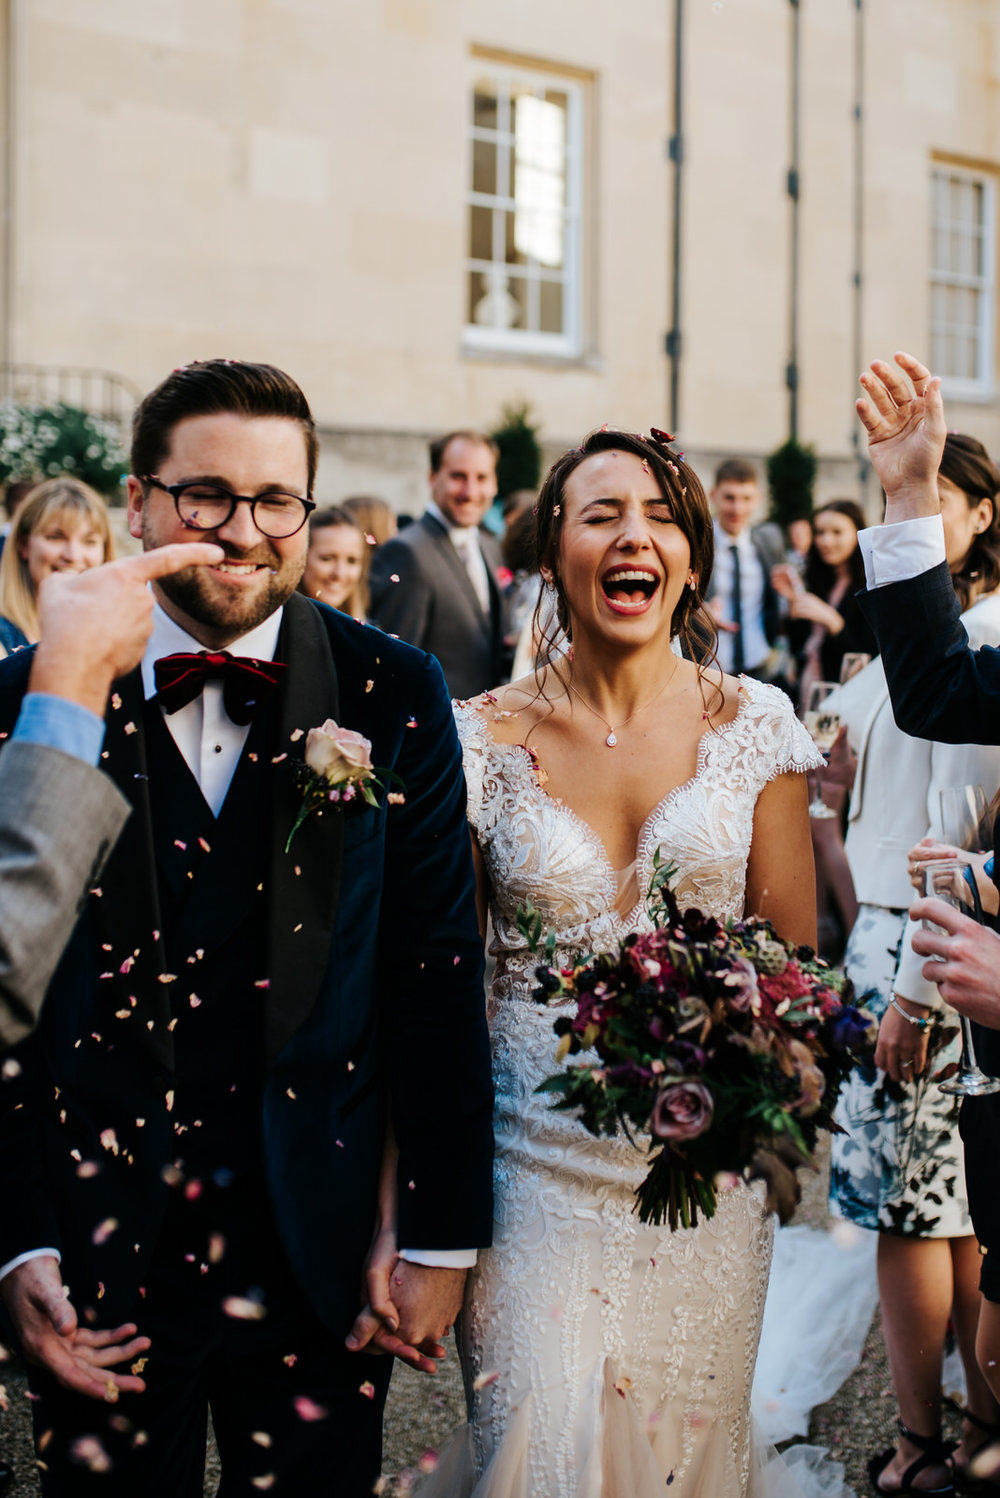 Bride and groom pull funny faces as confetti is thrown at them after wedding ceremony